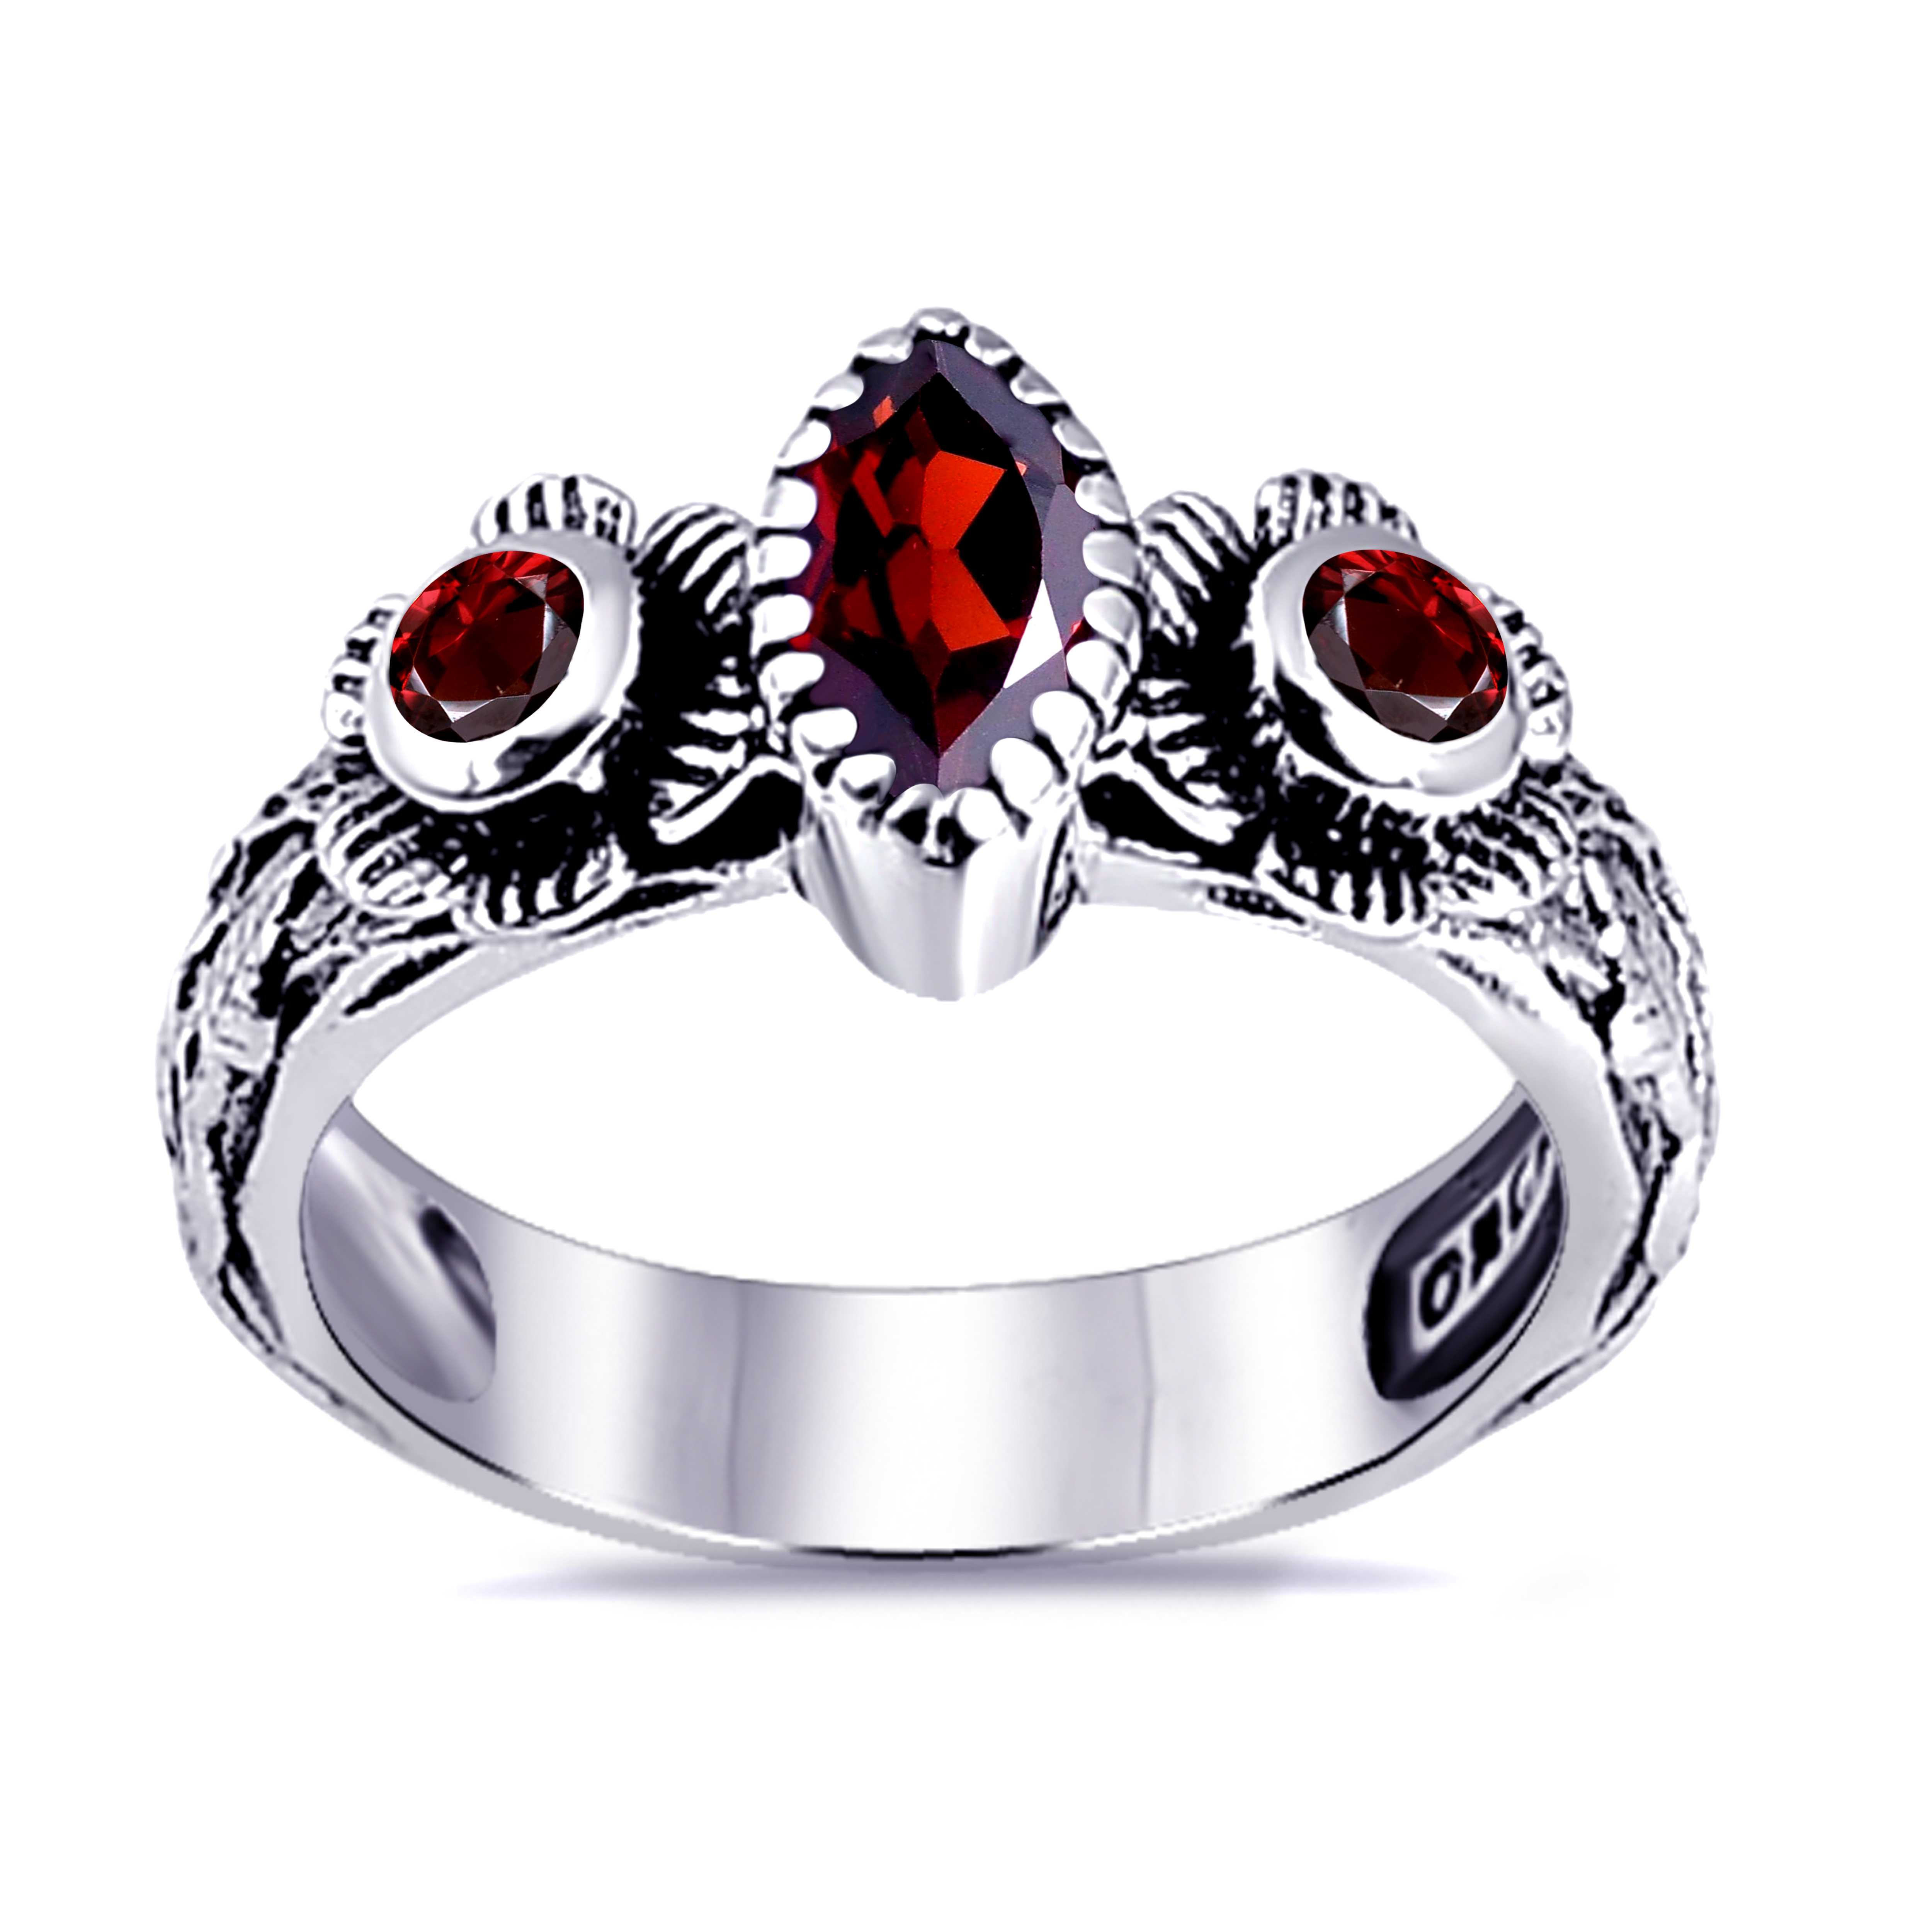 Orchid Jewelry 0.99 Ctw Marquise Shape Red Garnet Sterling Silver Statement Ring